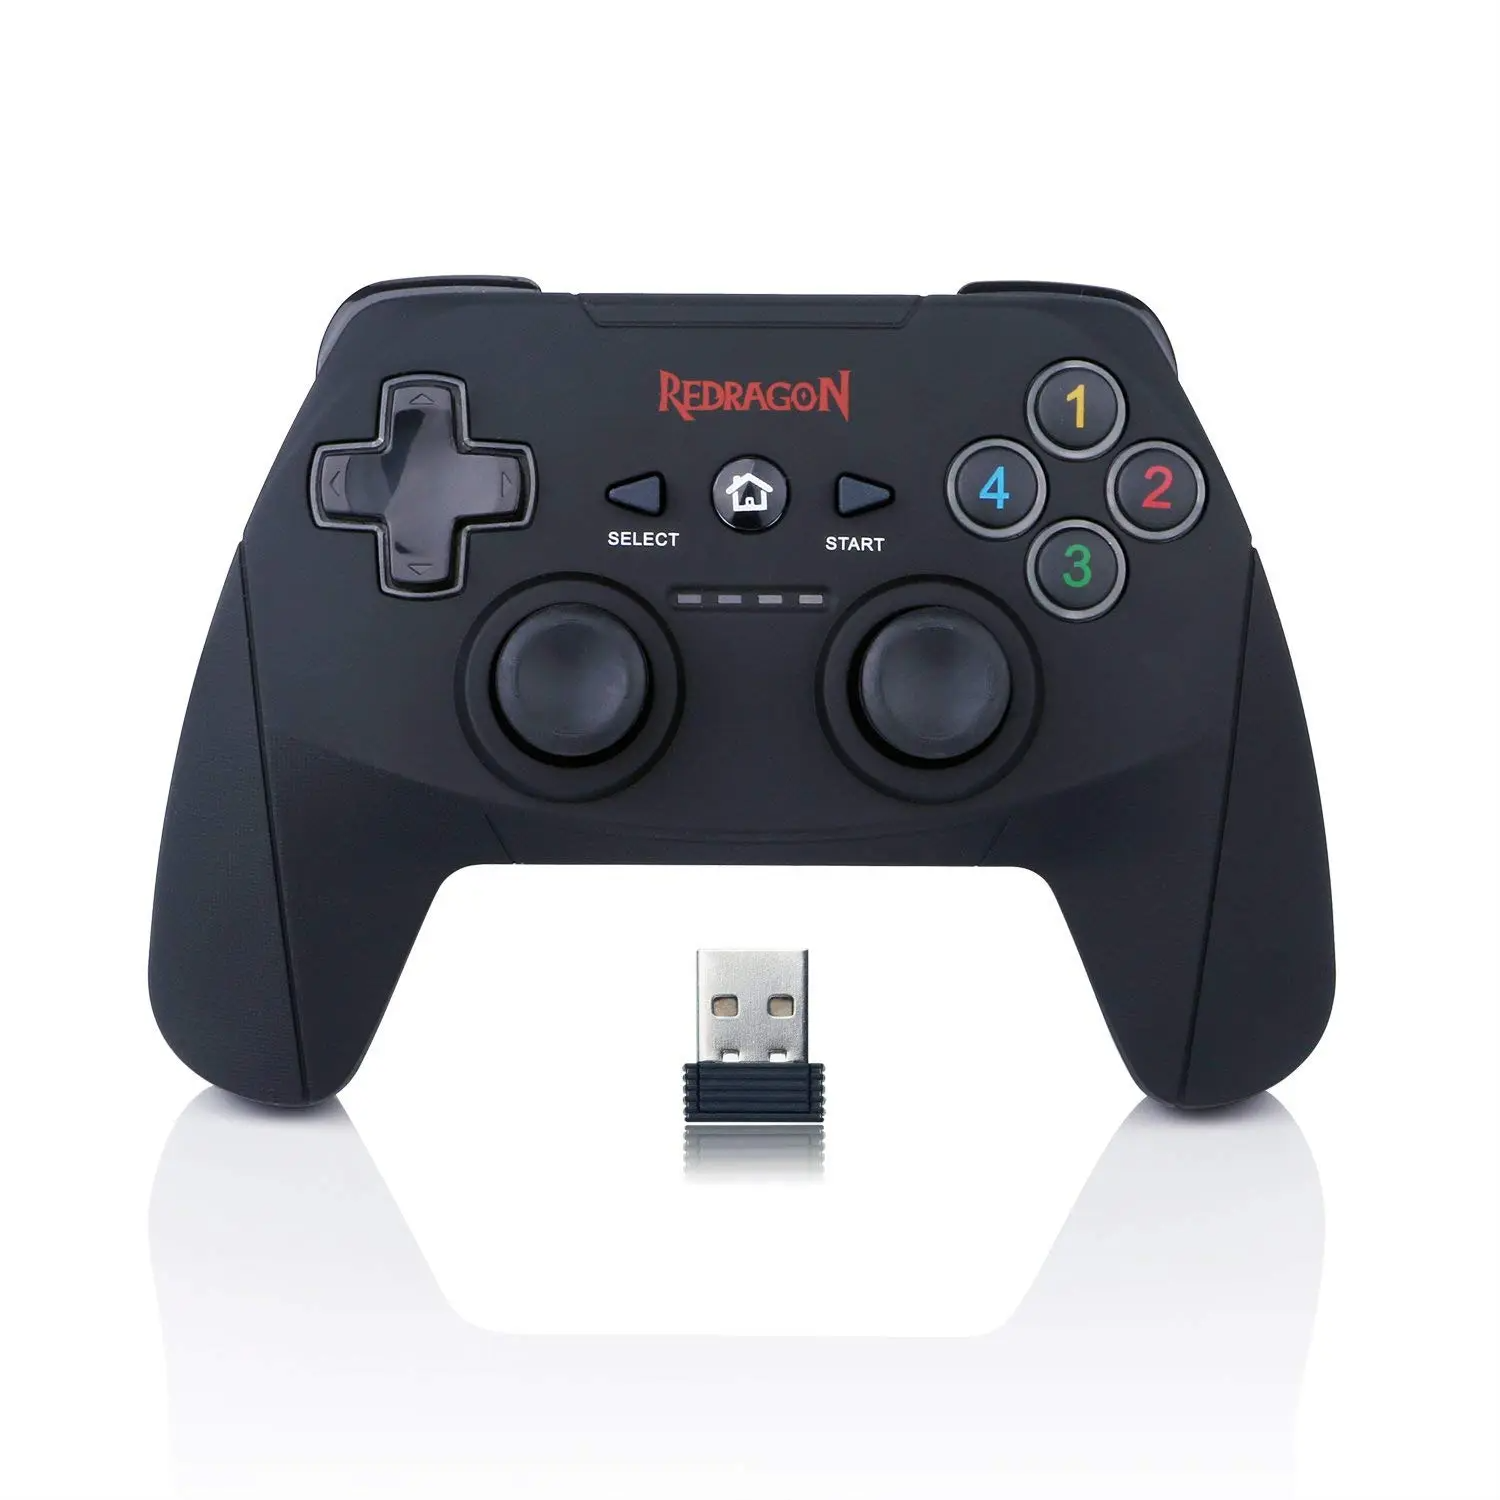 High Quality Redragon G808 2.4G USB Wireless Joystick Gamepad Gaming Controller For PC PS3